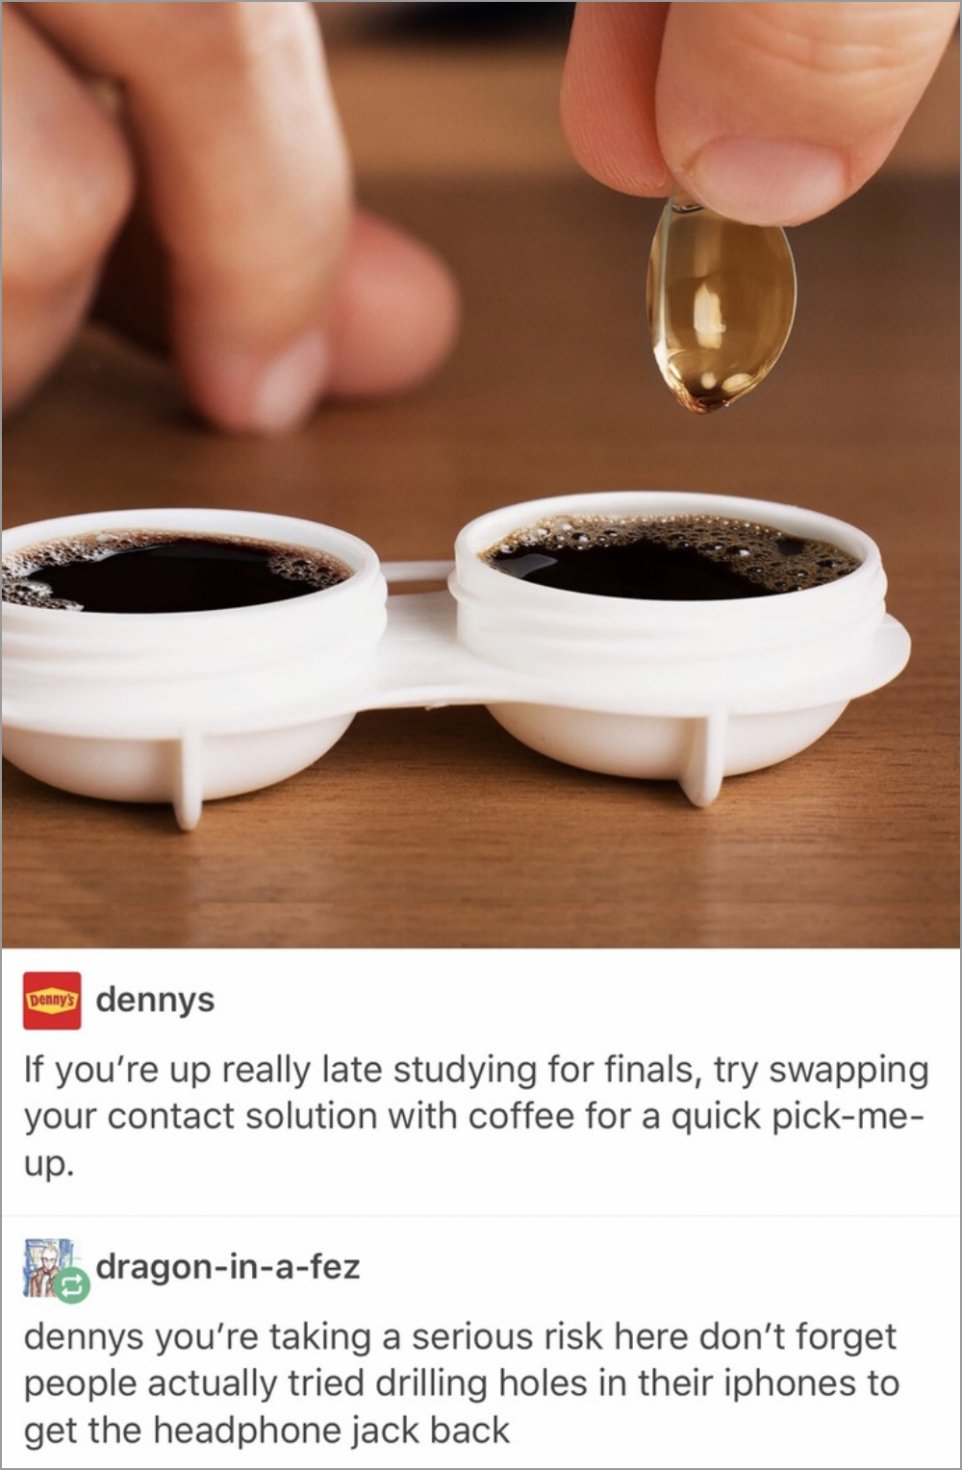 Denny's tries a joke post about soaking your contact lenses in coffee and someone pointing out to be careful with that stuff because people believed they could drill a whole in their iPhone to get the earphones jack back.